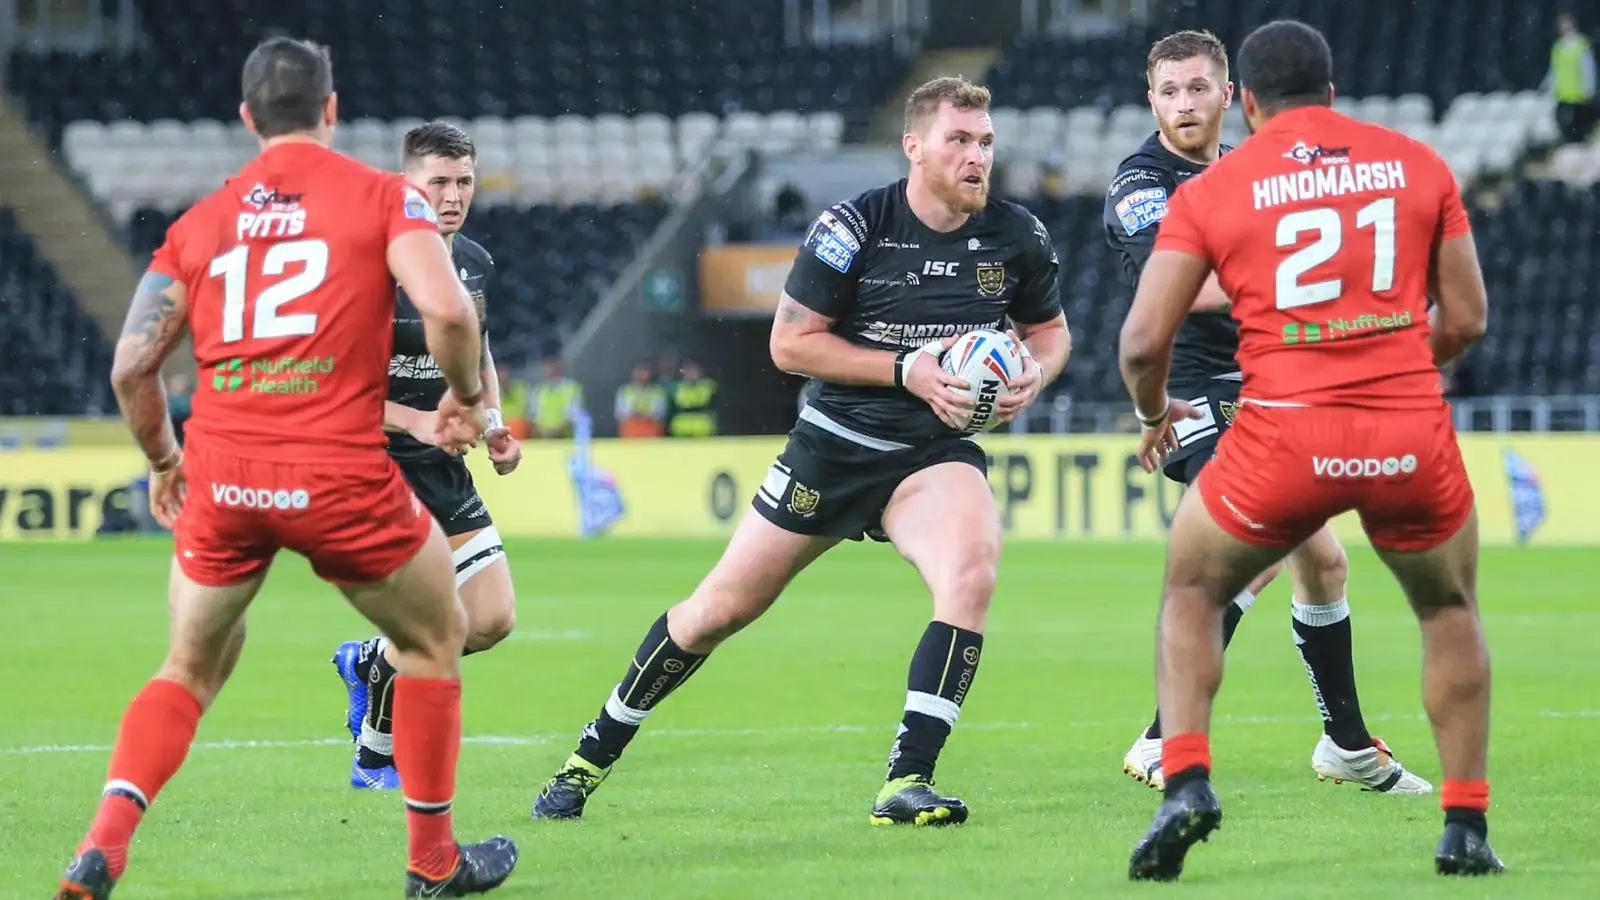 Castleford Tigers finally sign ex-London Broncos prop after failed swoop last year